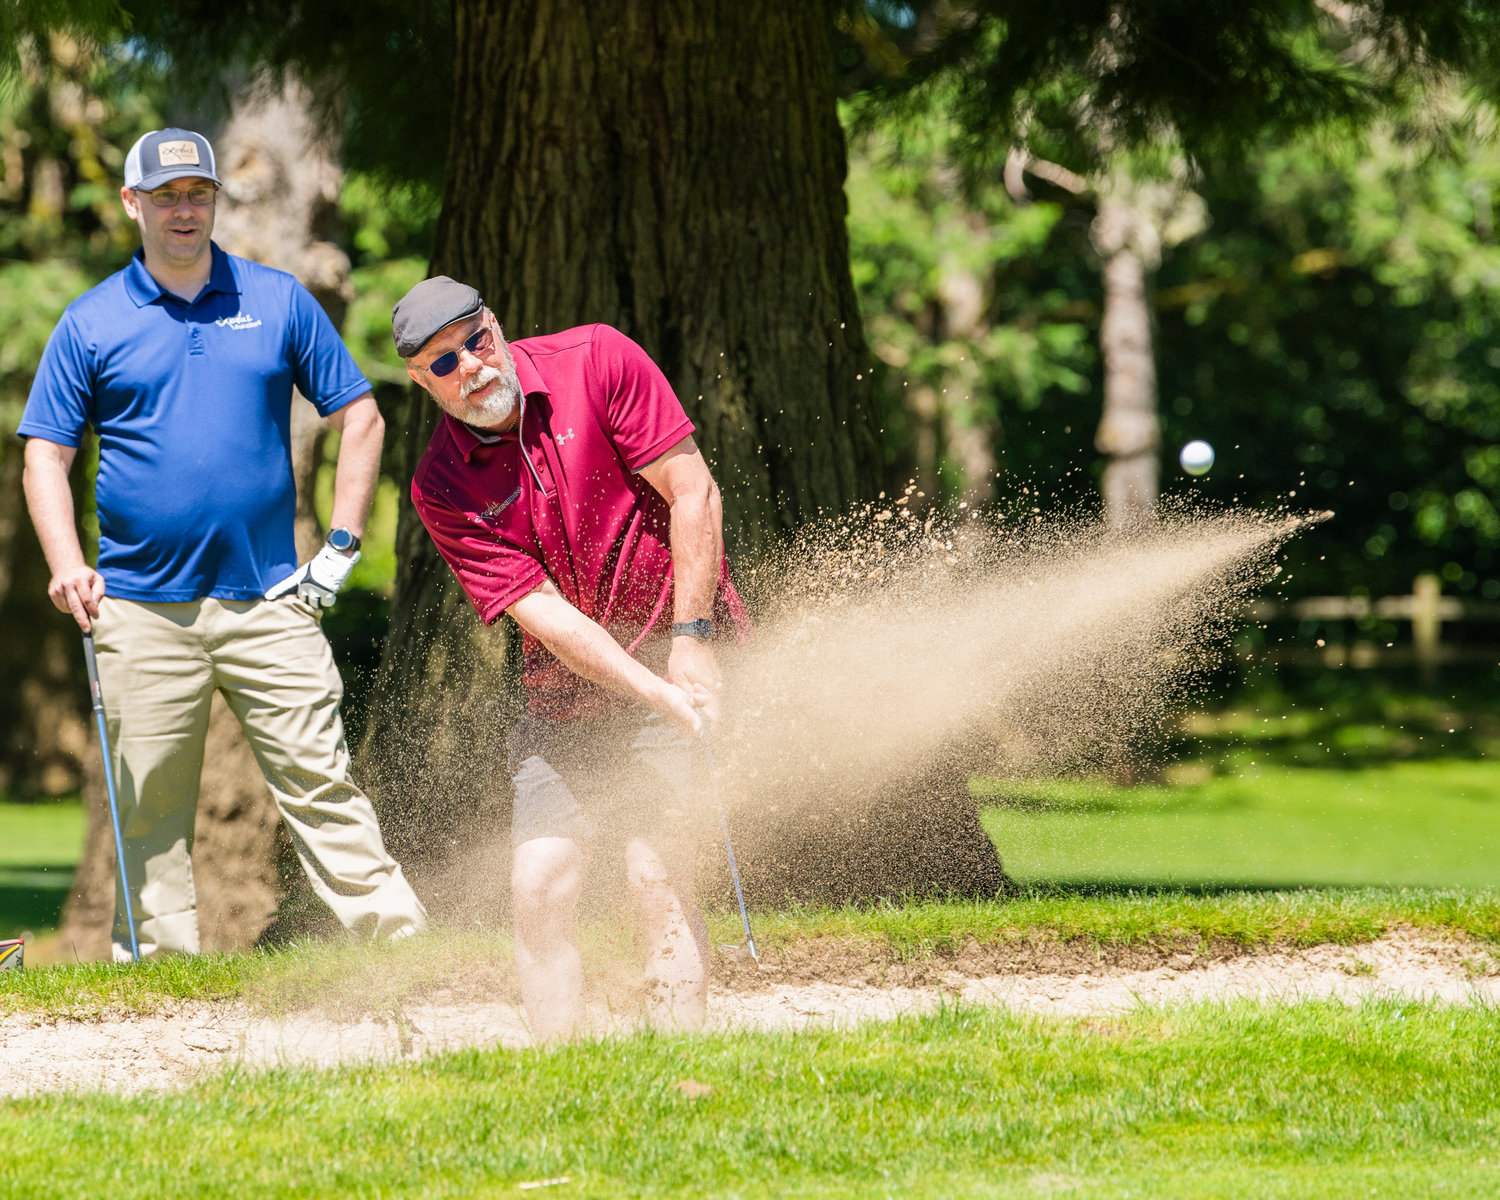 Chris Arhutick hits his ball out of the sand during a charity golf tournament at Riverside Golf Course in Chehalis on Friday.